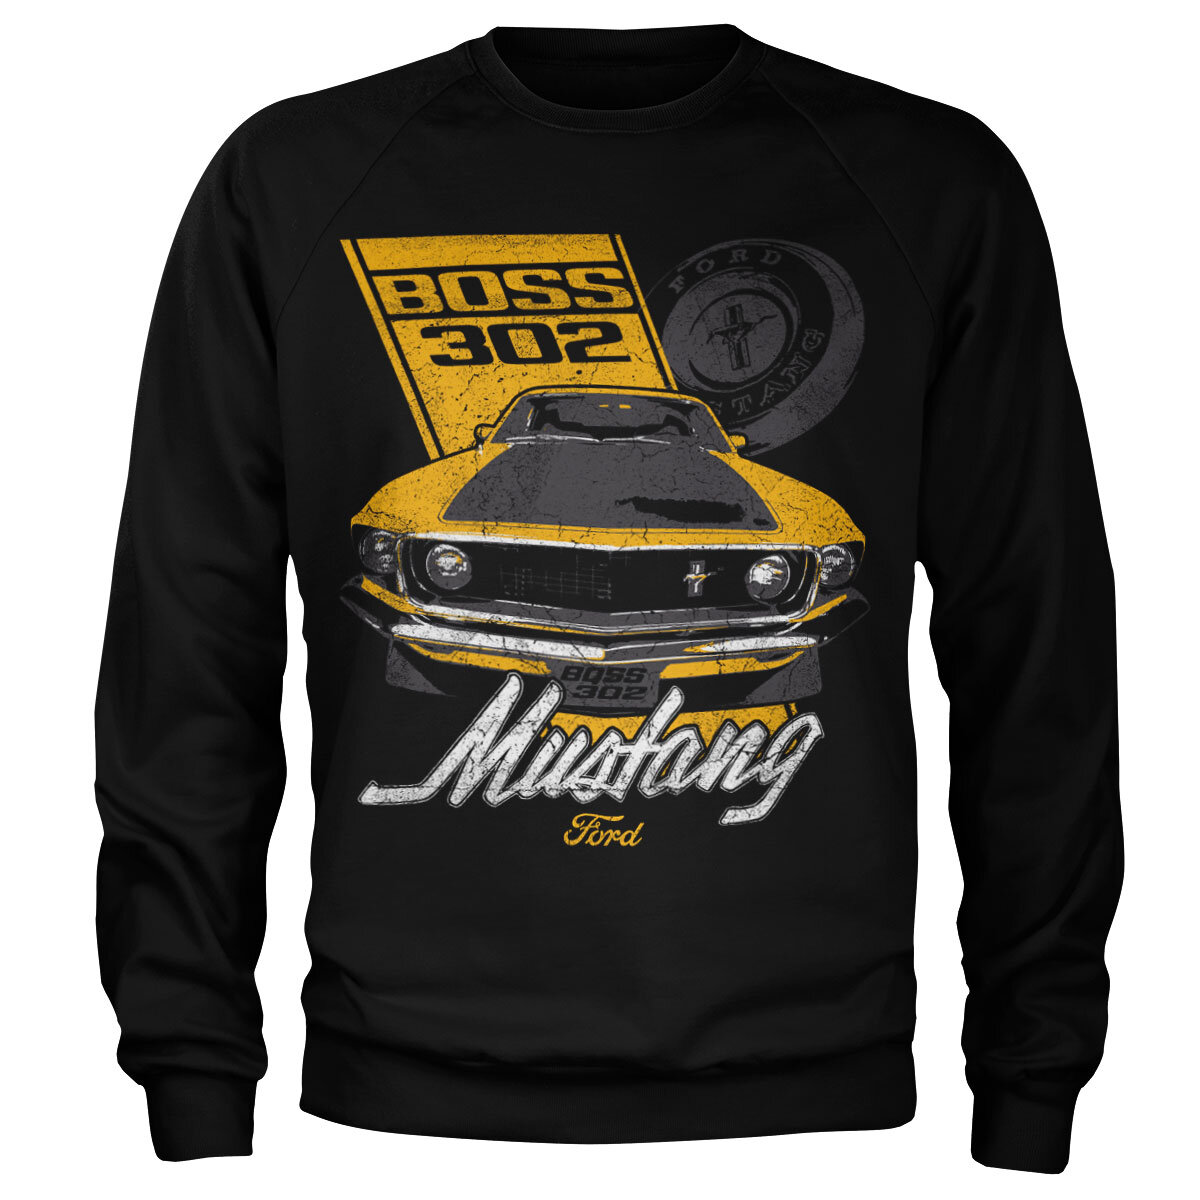 Ford Mustang Sweat-shirt BOSS 302 Shelby GT Genuine American Classic Car Clothing 